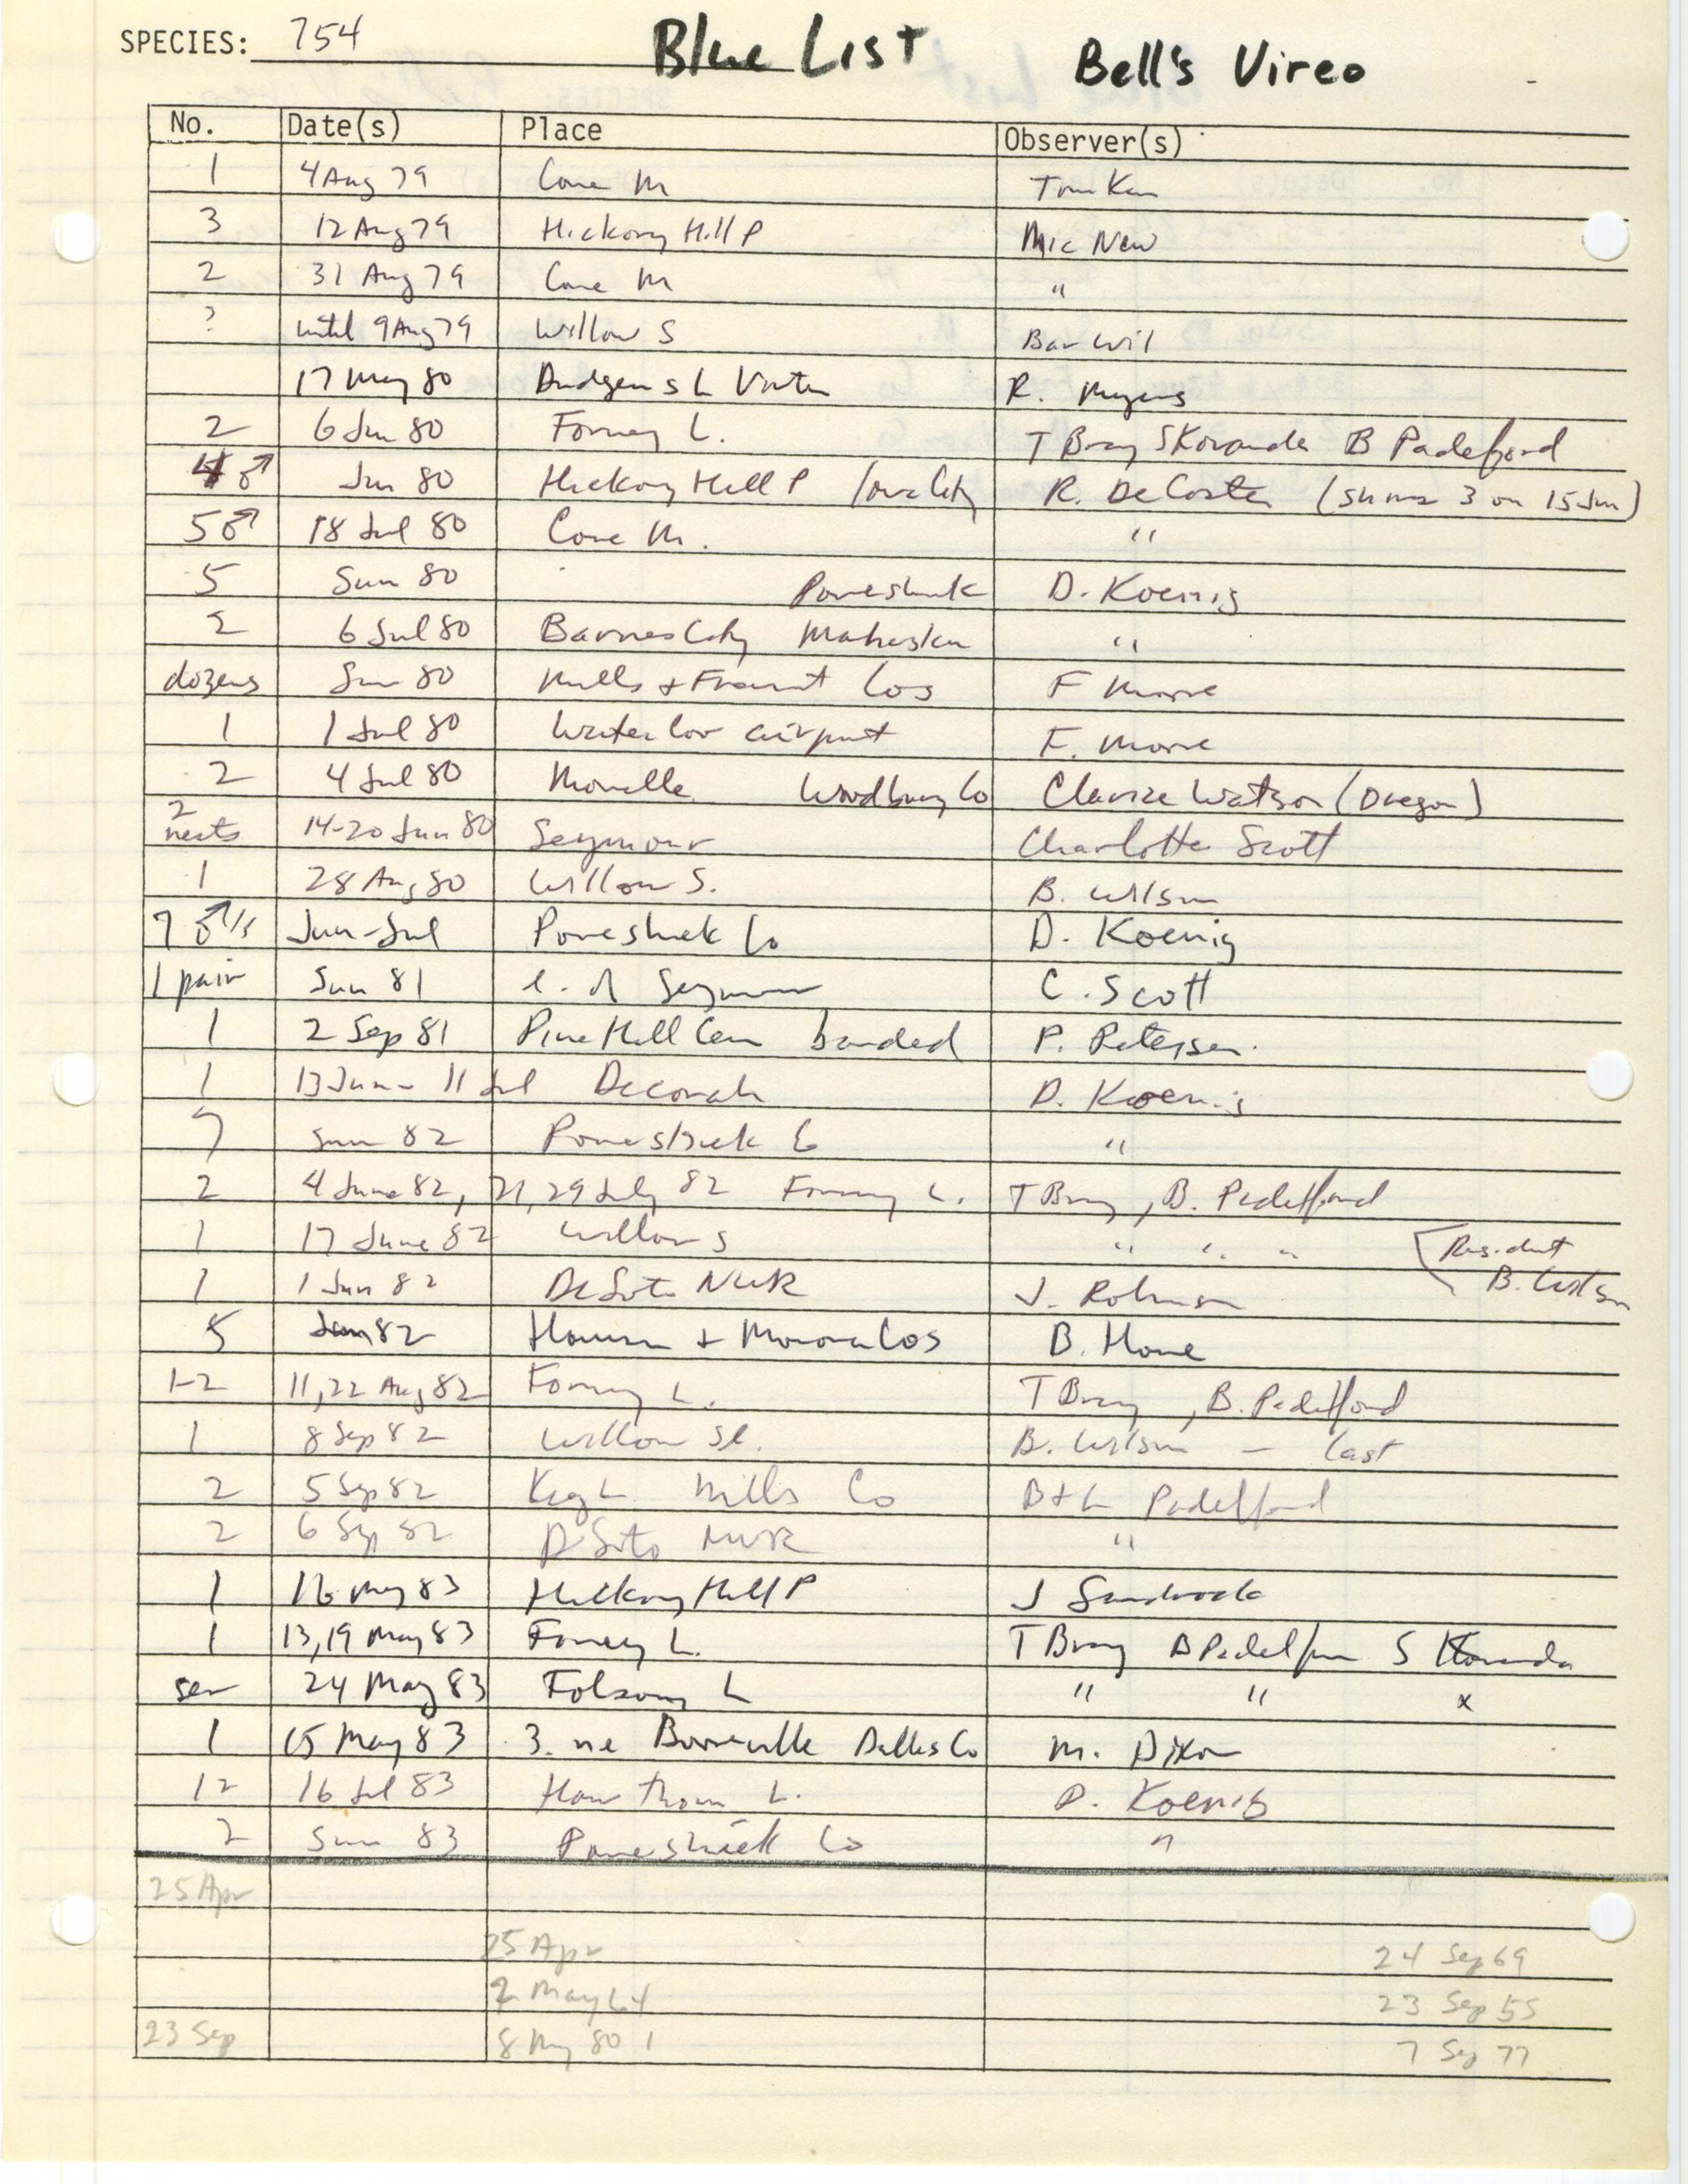 Iowa Ornithologists' Union, field report compiled data, Bell's Vireo, 1979-1983